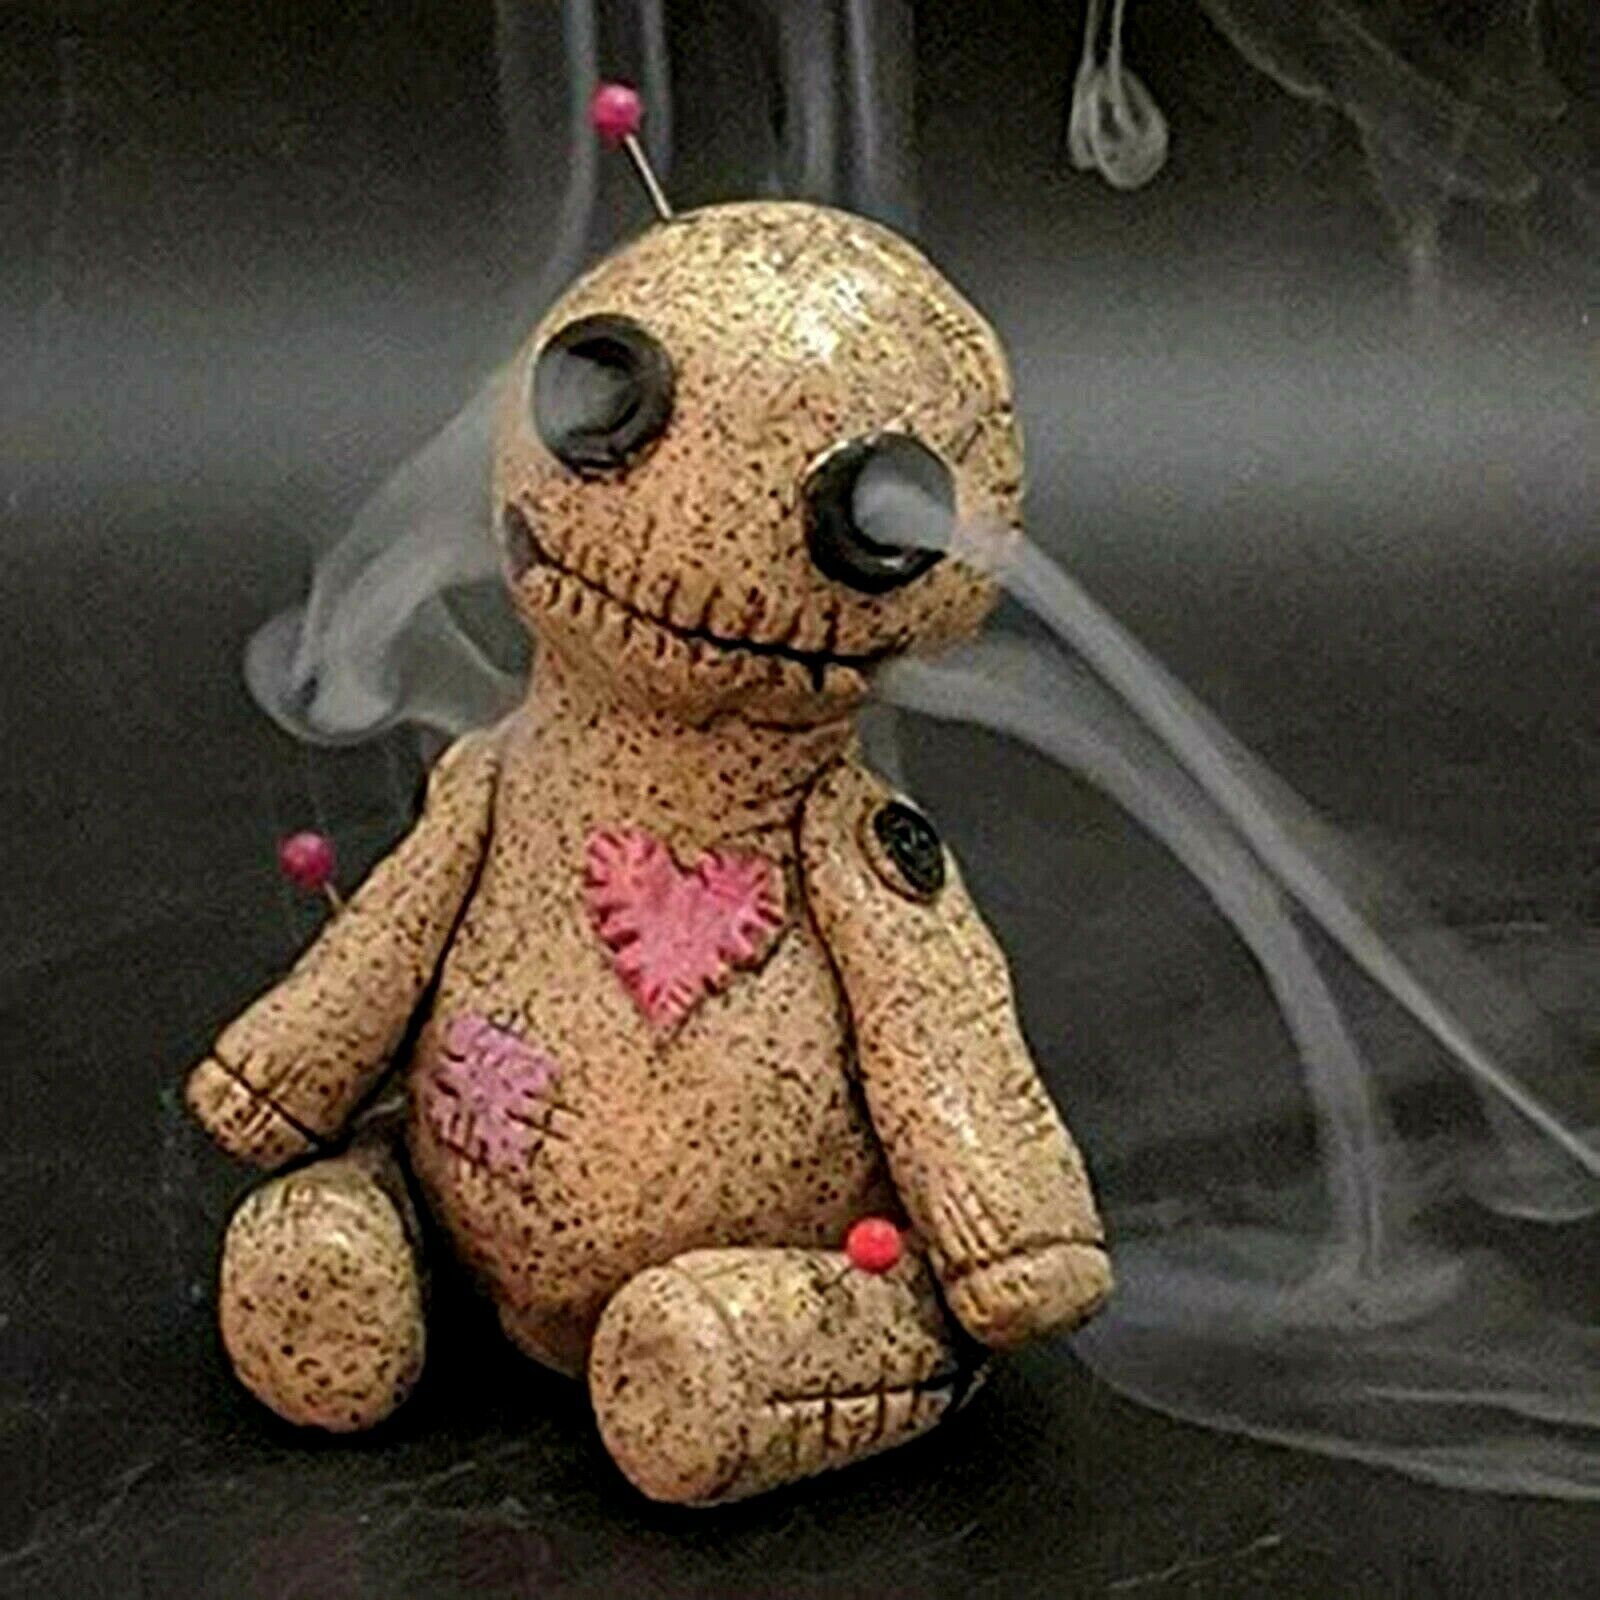 Voodoo Doll Incense Cone Burner Bad Doll Resin Ornament Home Decorative For Baby